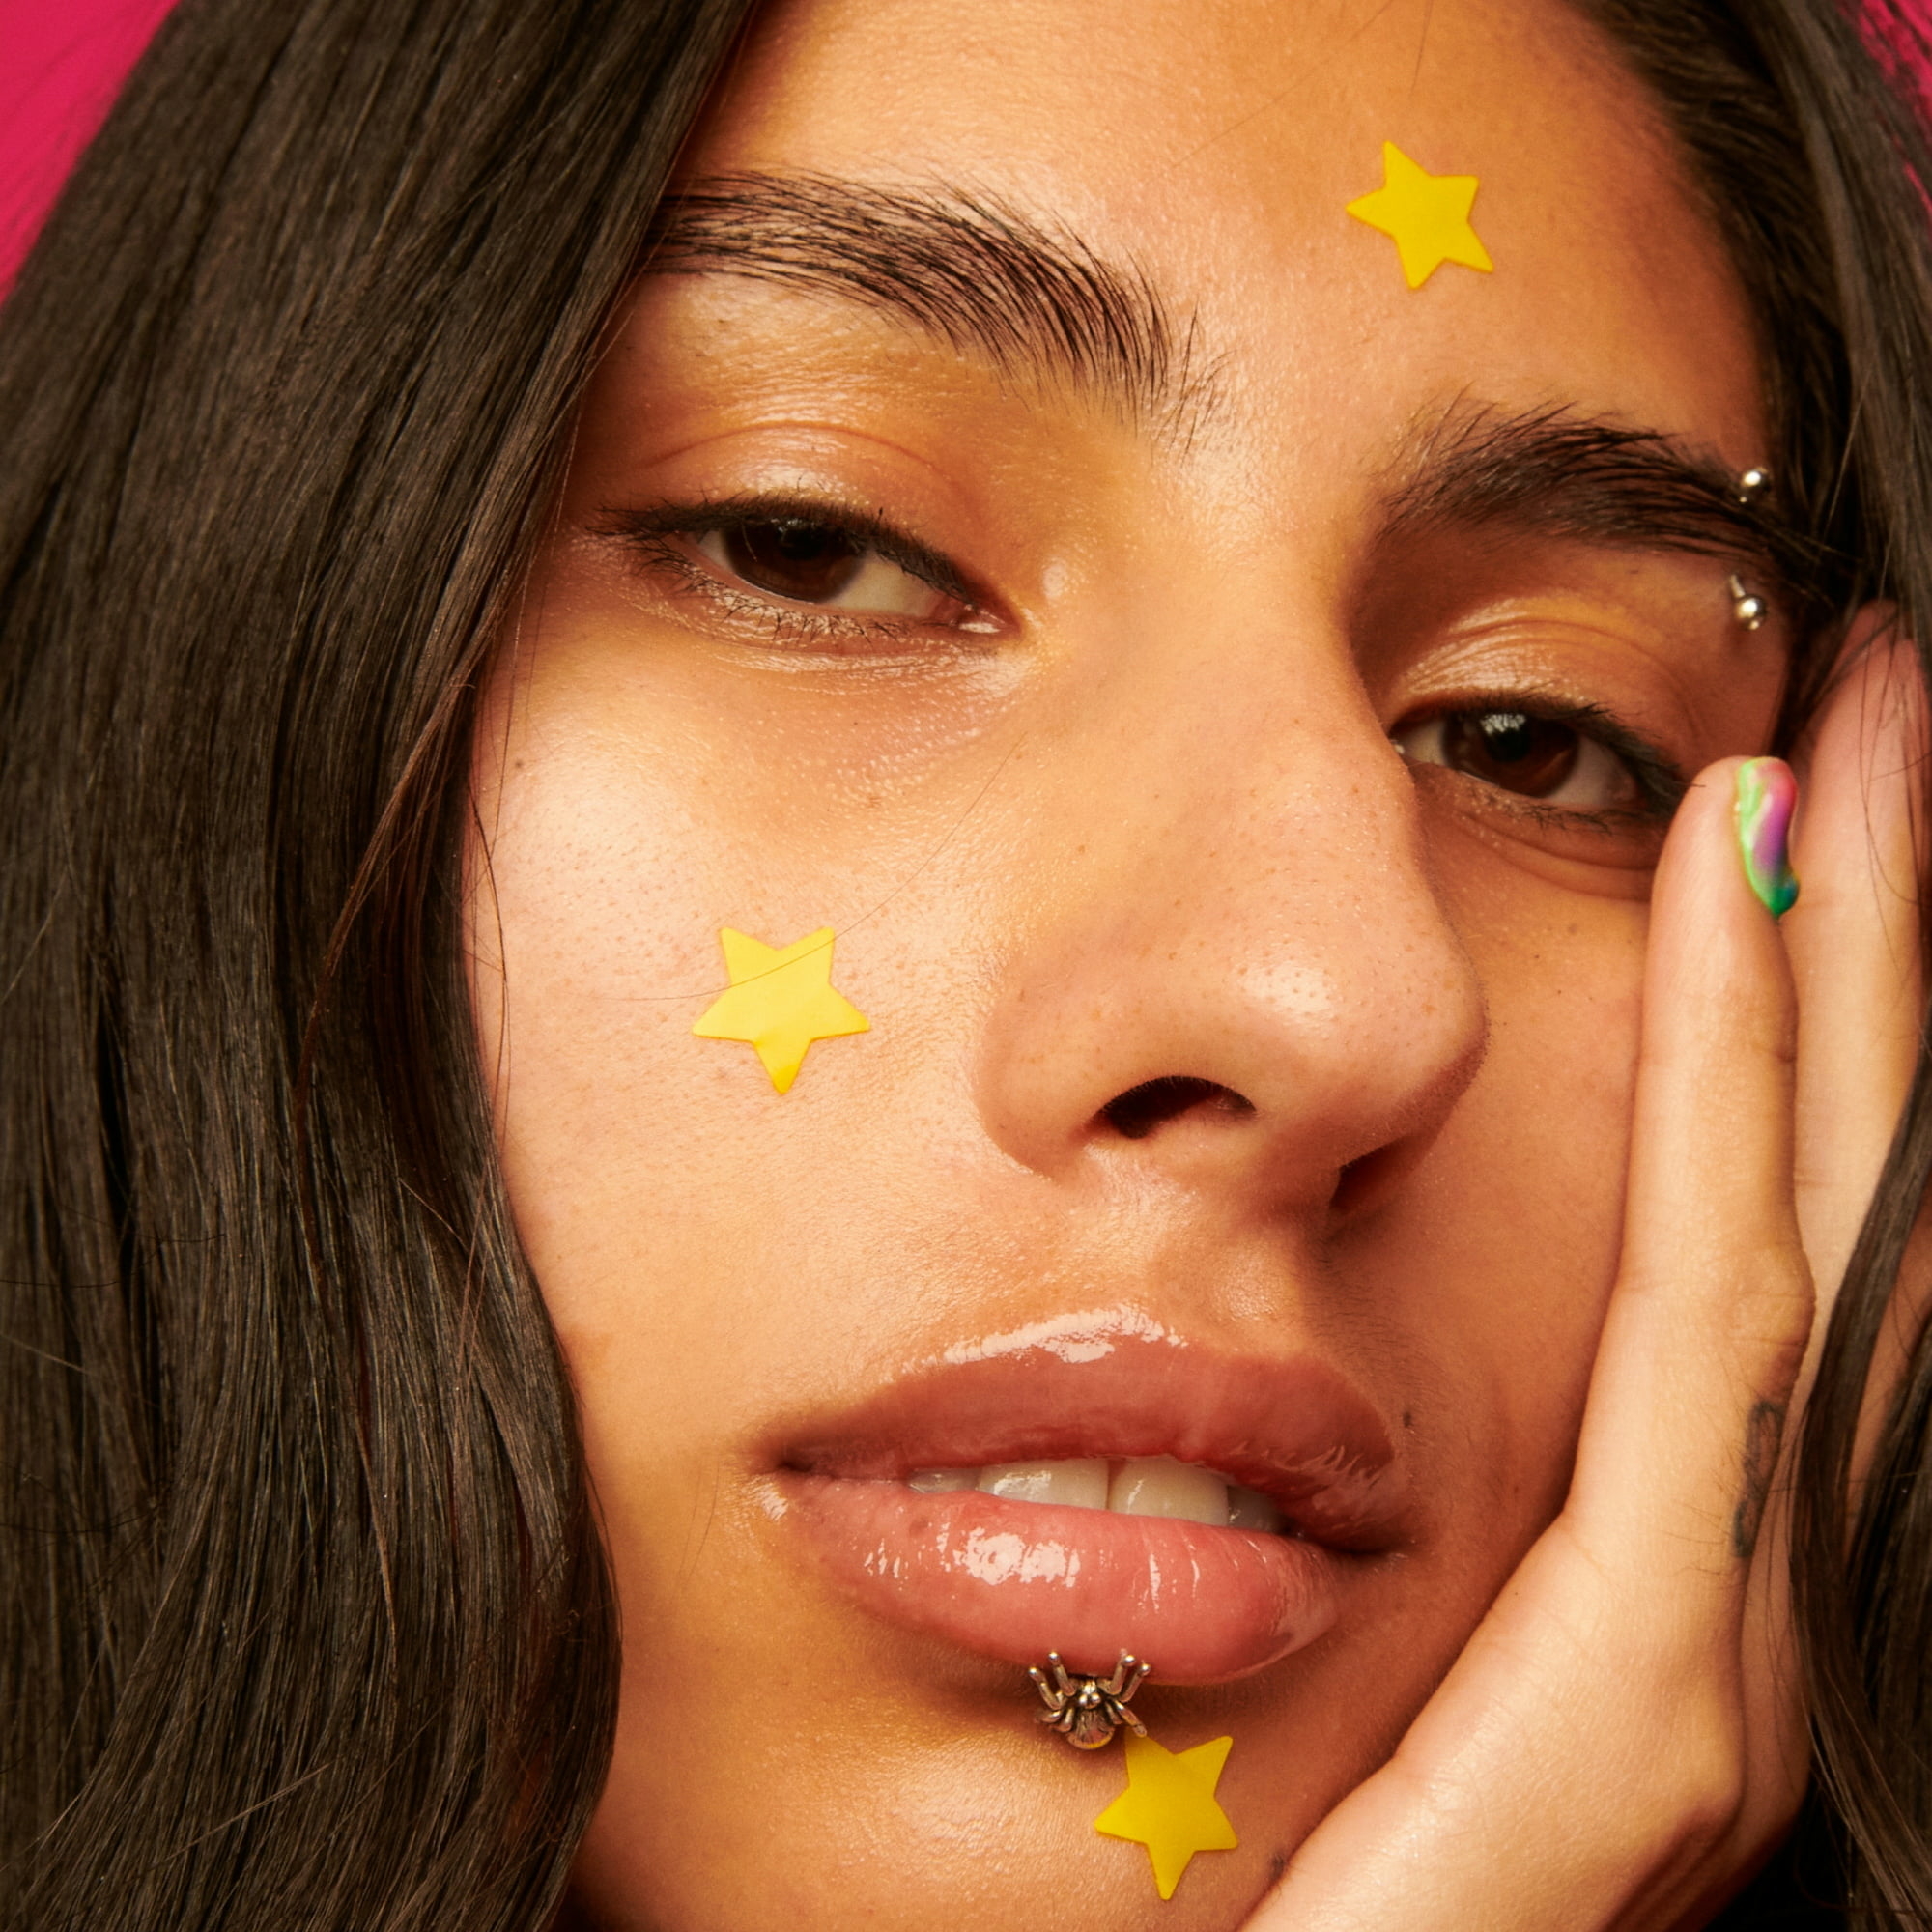 A model using the  yellow, star-shaped patches on her face